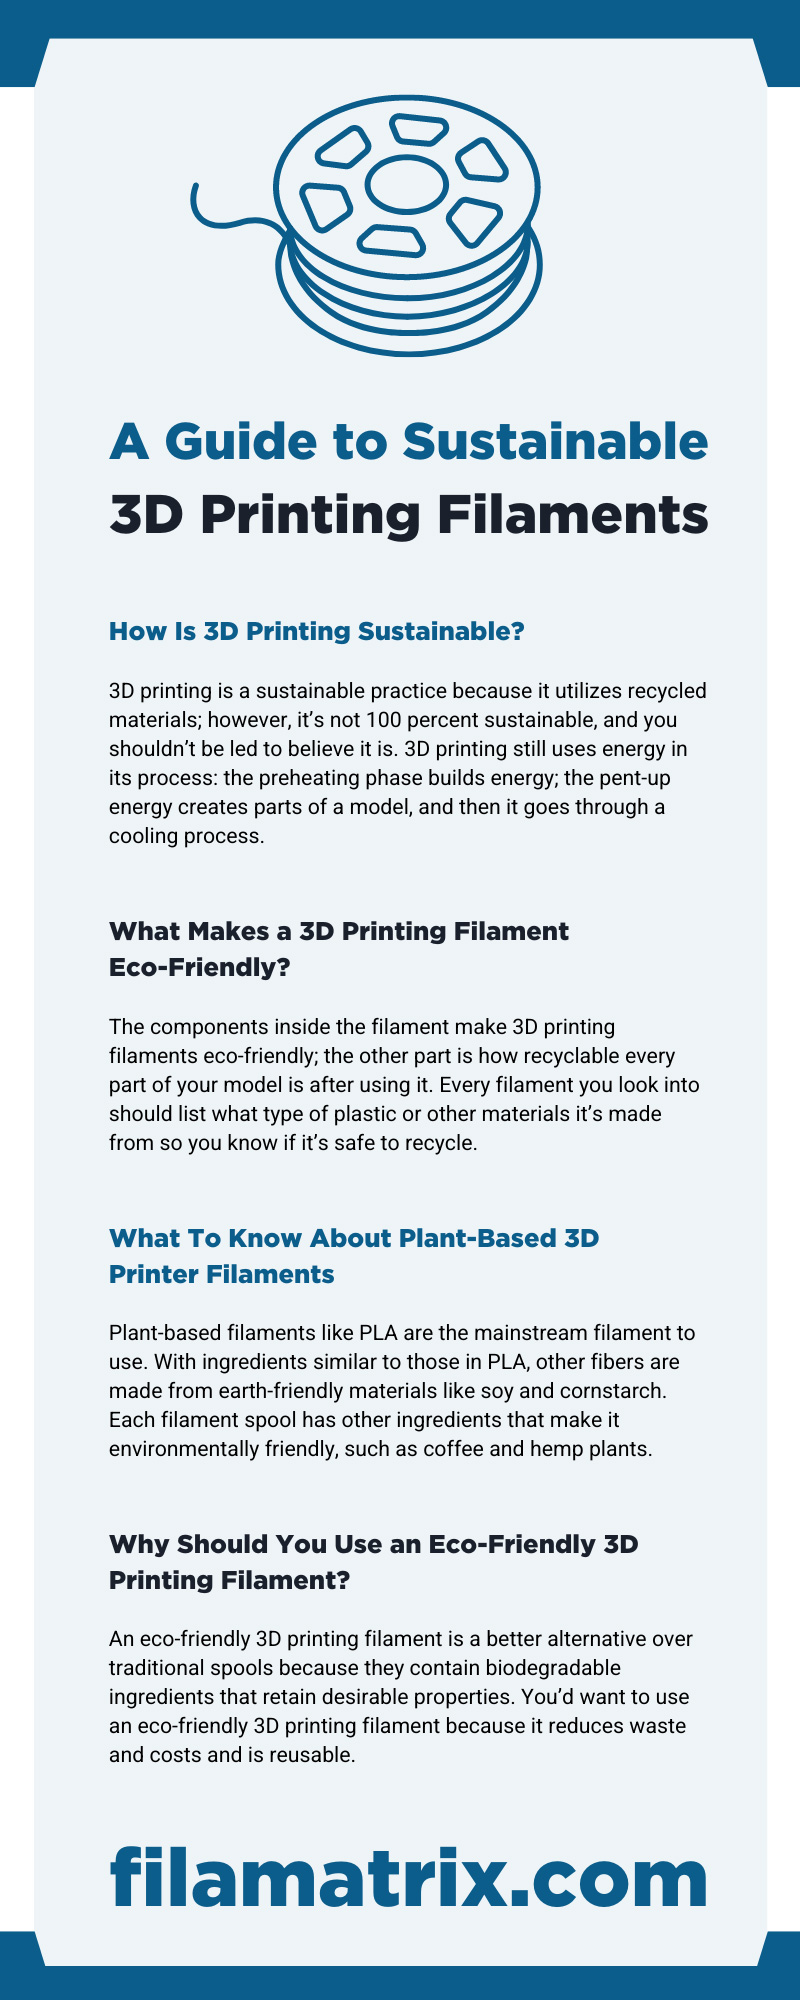 A Guide to Sustainable 3D Printing Filaments